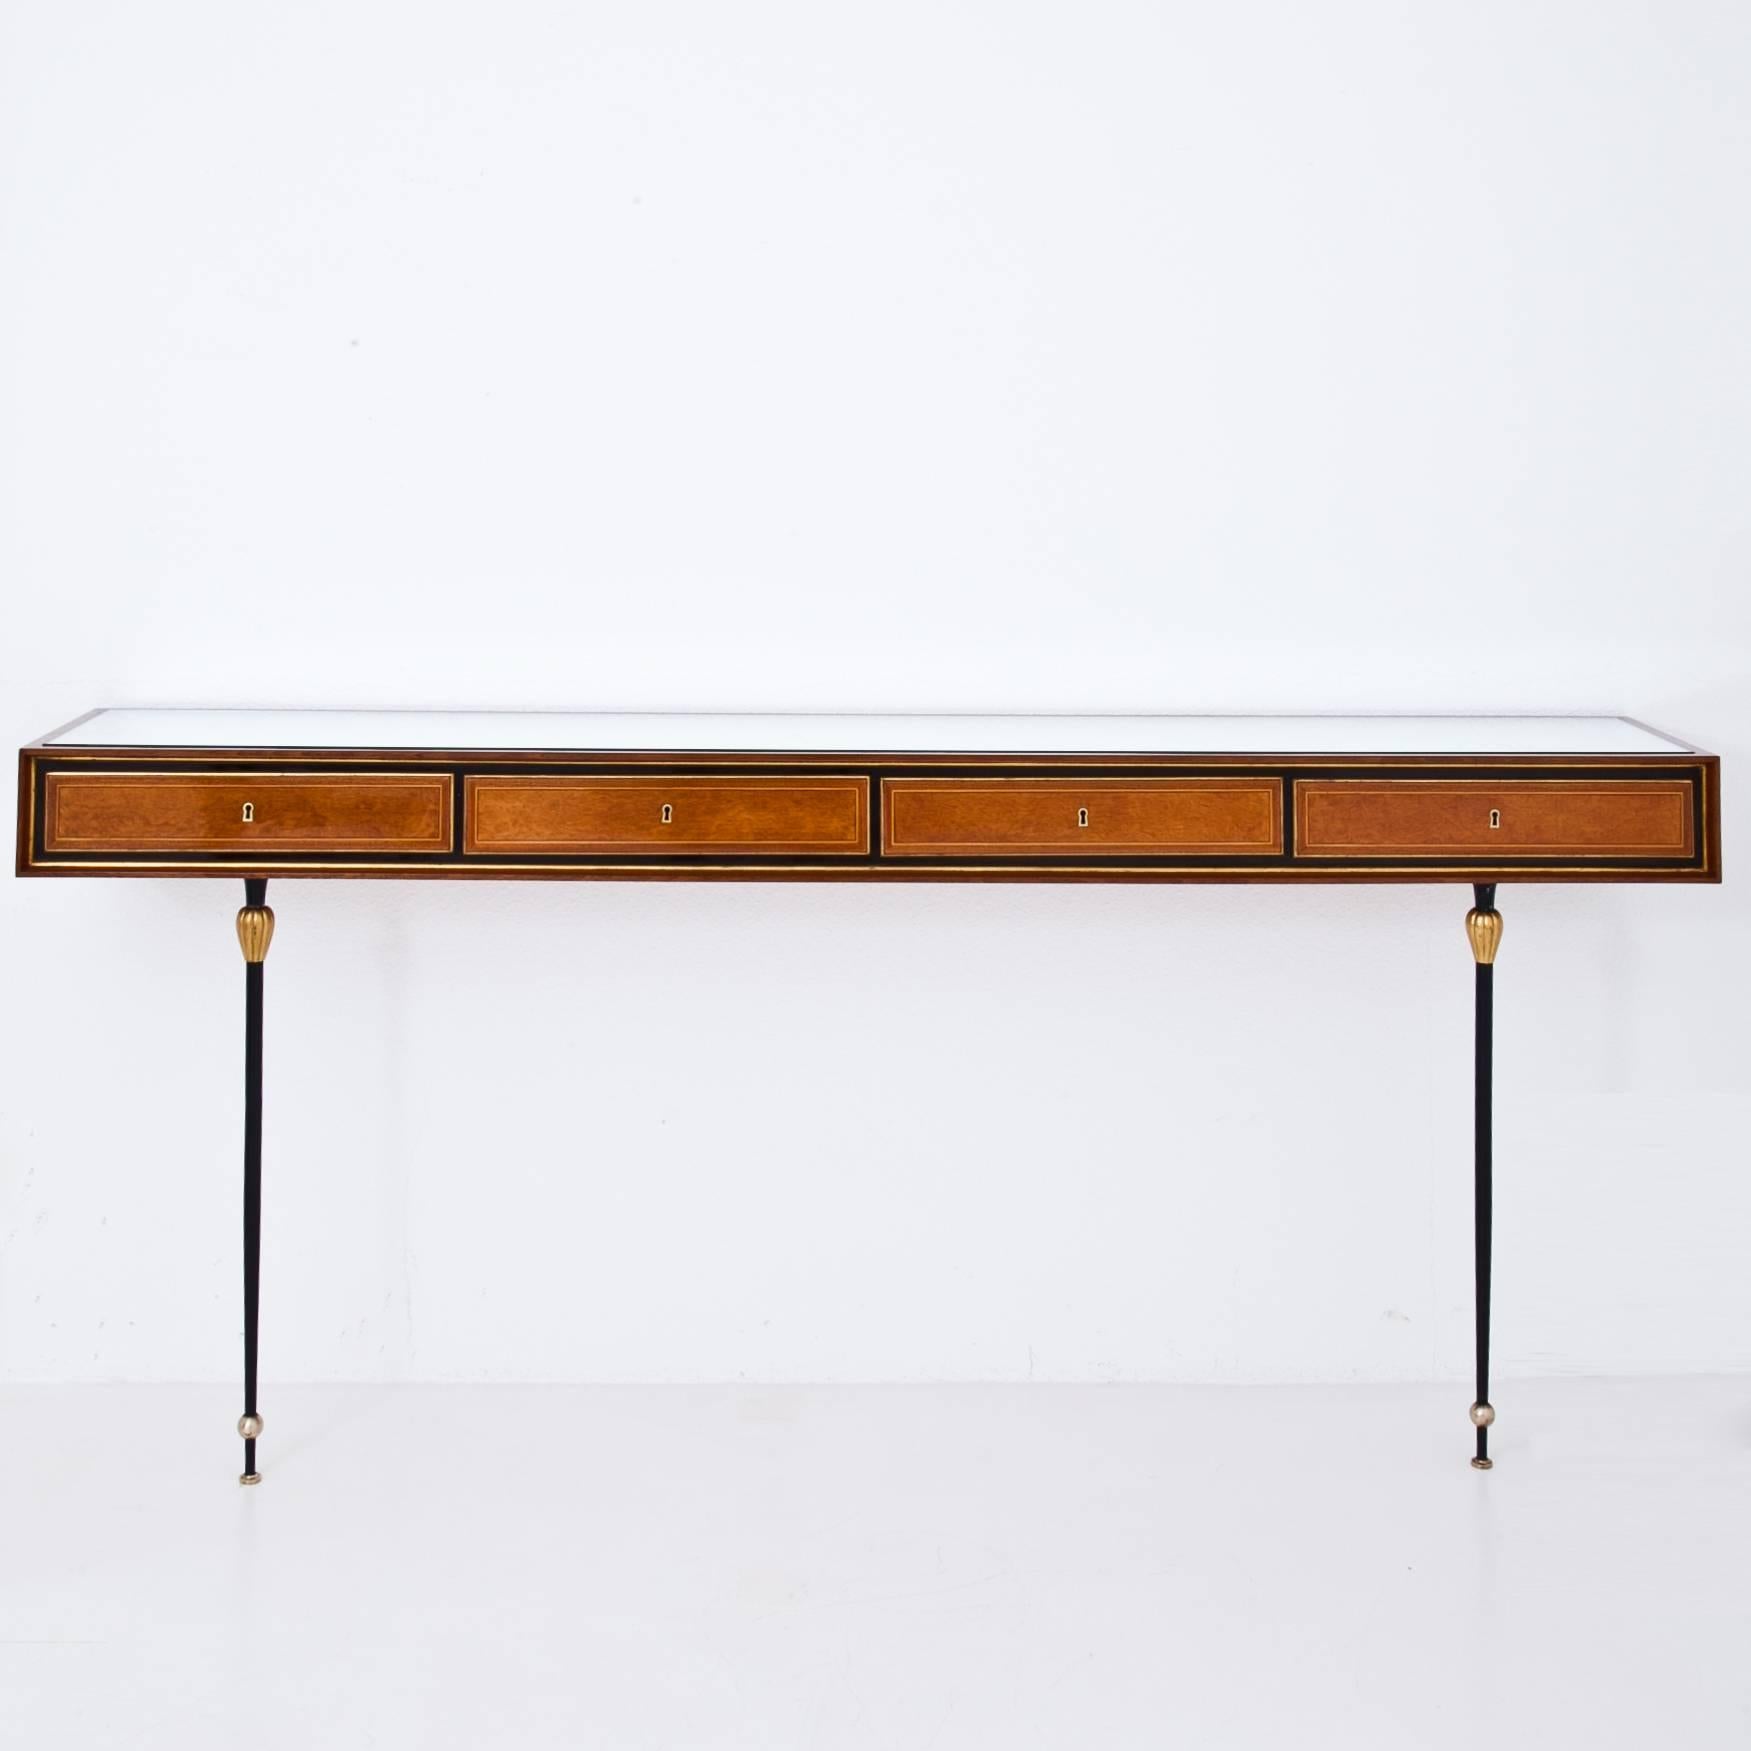 Mahogany console with four drawers on tall slim metal legs. The console is decorated with fine thread inlays on the front and has a mirrored glass pane on top. The fitting chair repeats the same legs and was reupholstered with an elegant black